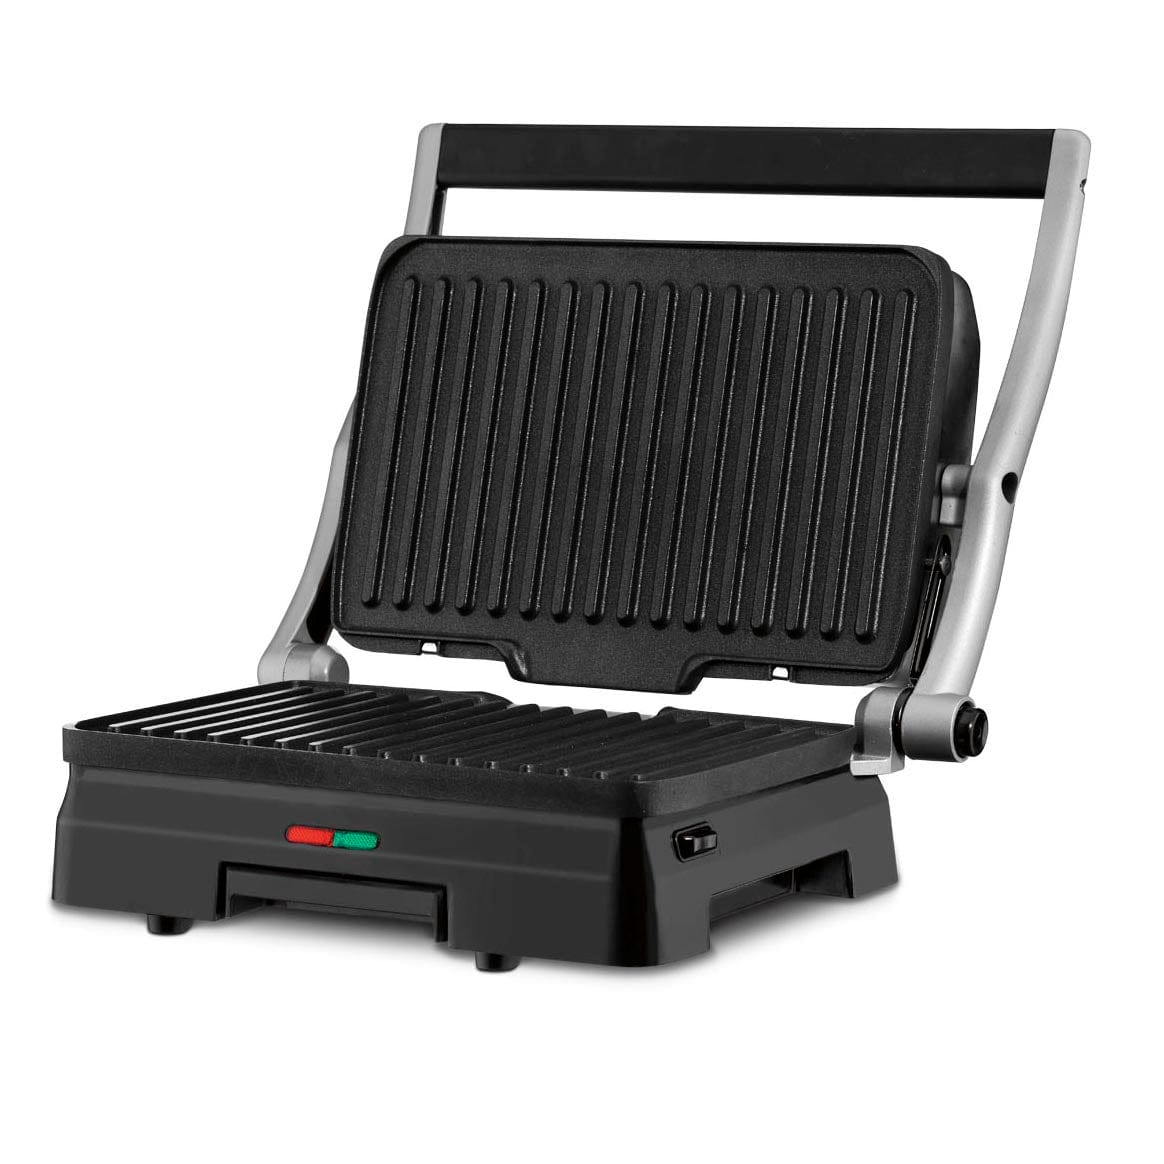 Cuisinart GR-11FR 3 in 1 Grill and Panini Press Griddler - Certified Refurbished